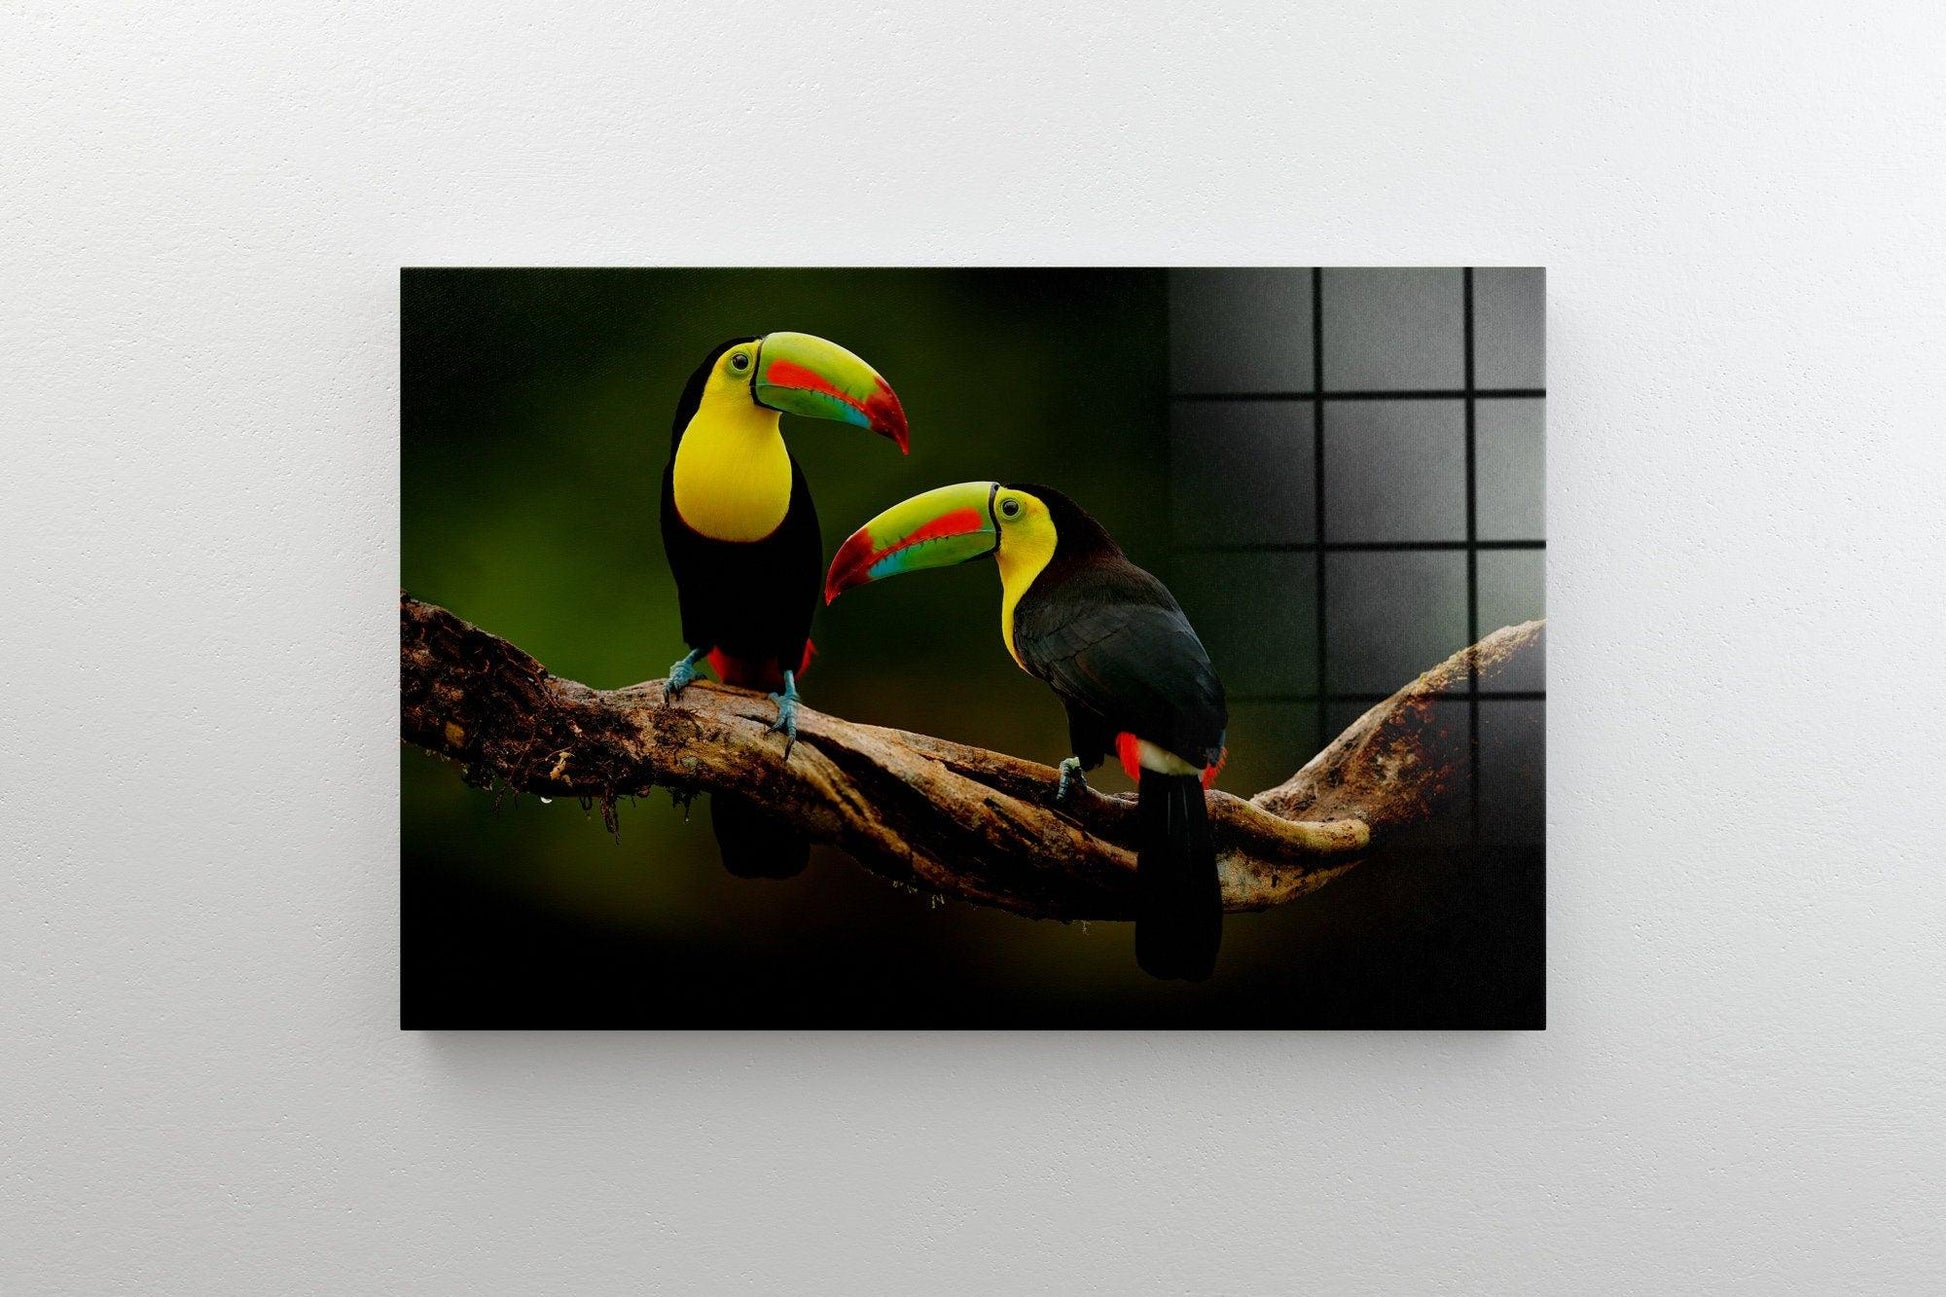 Colored Parrot Birds Canvas Wall Art Print| Poster Print Decor for Home & Office Decoration, Poster or READY TO HANG, watercolor animals